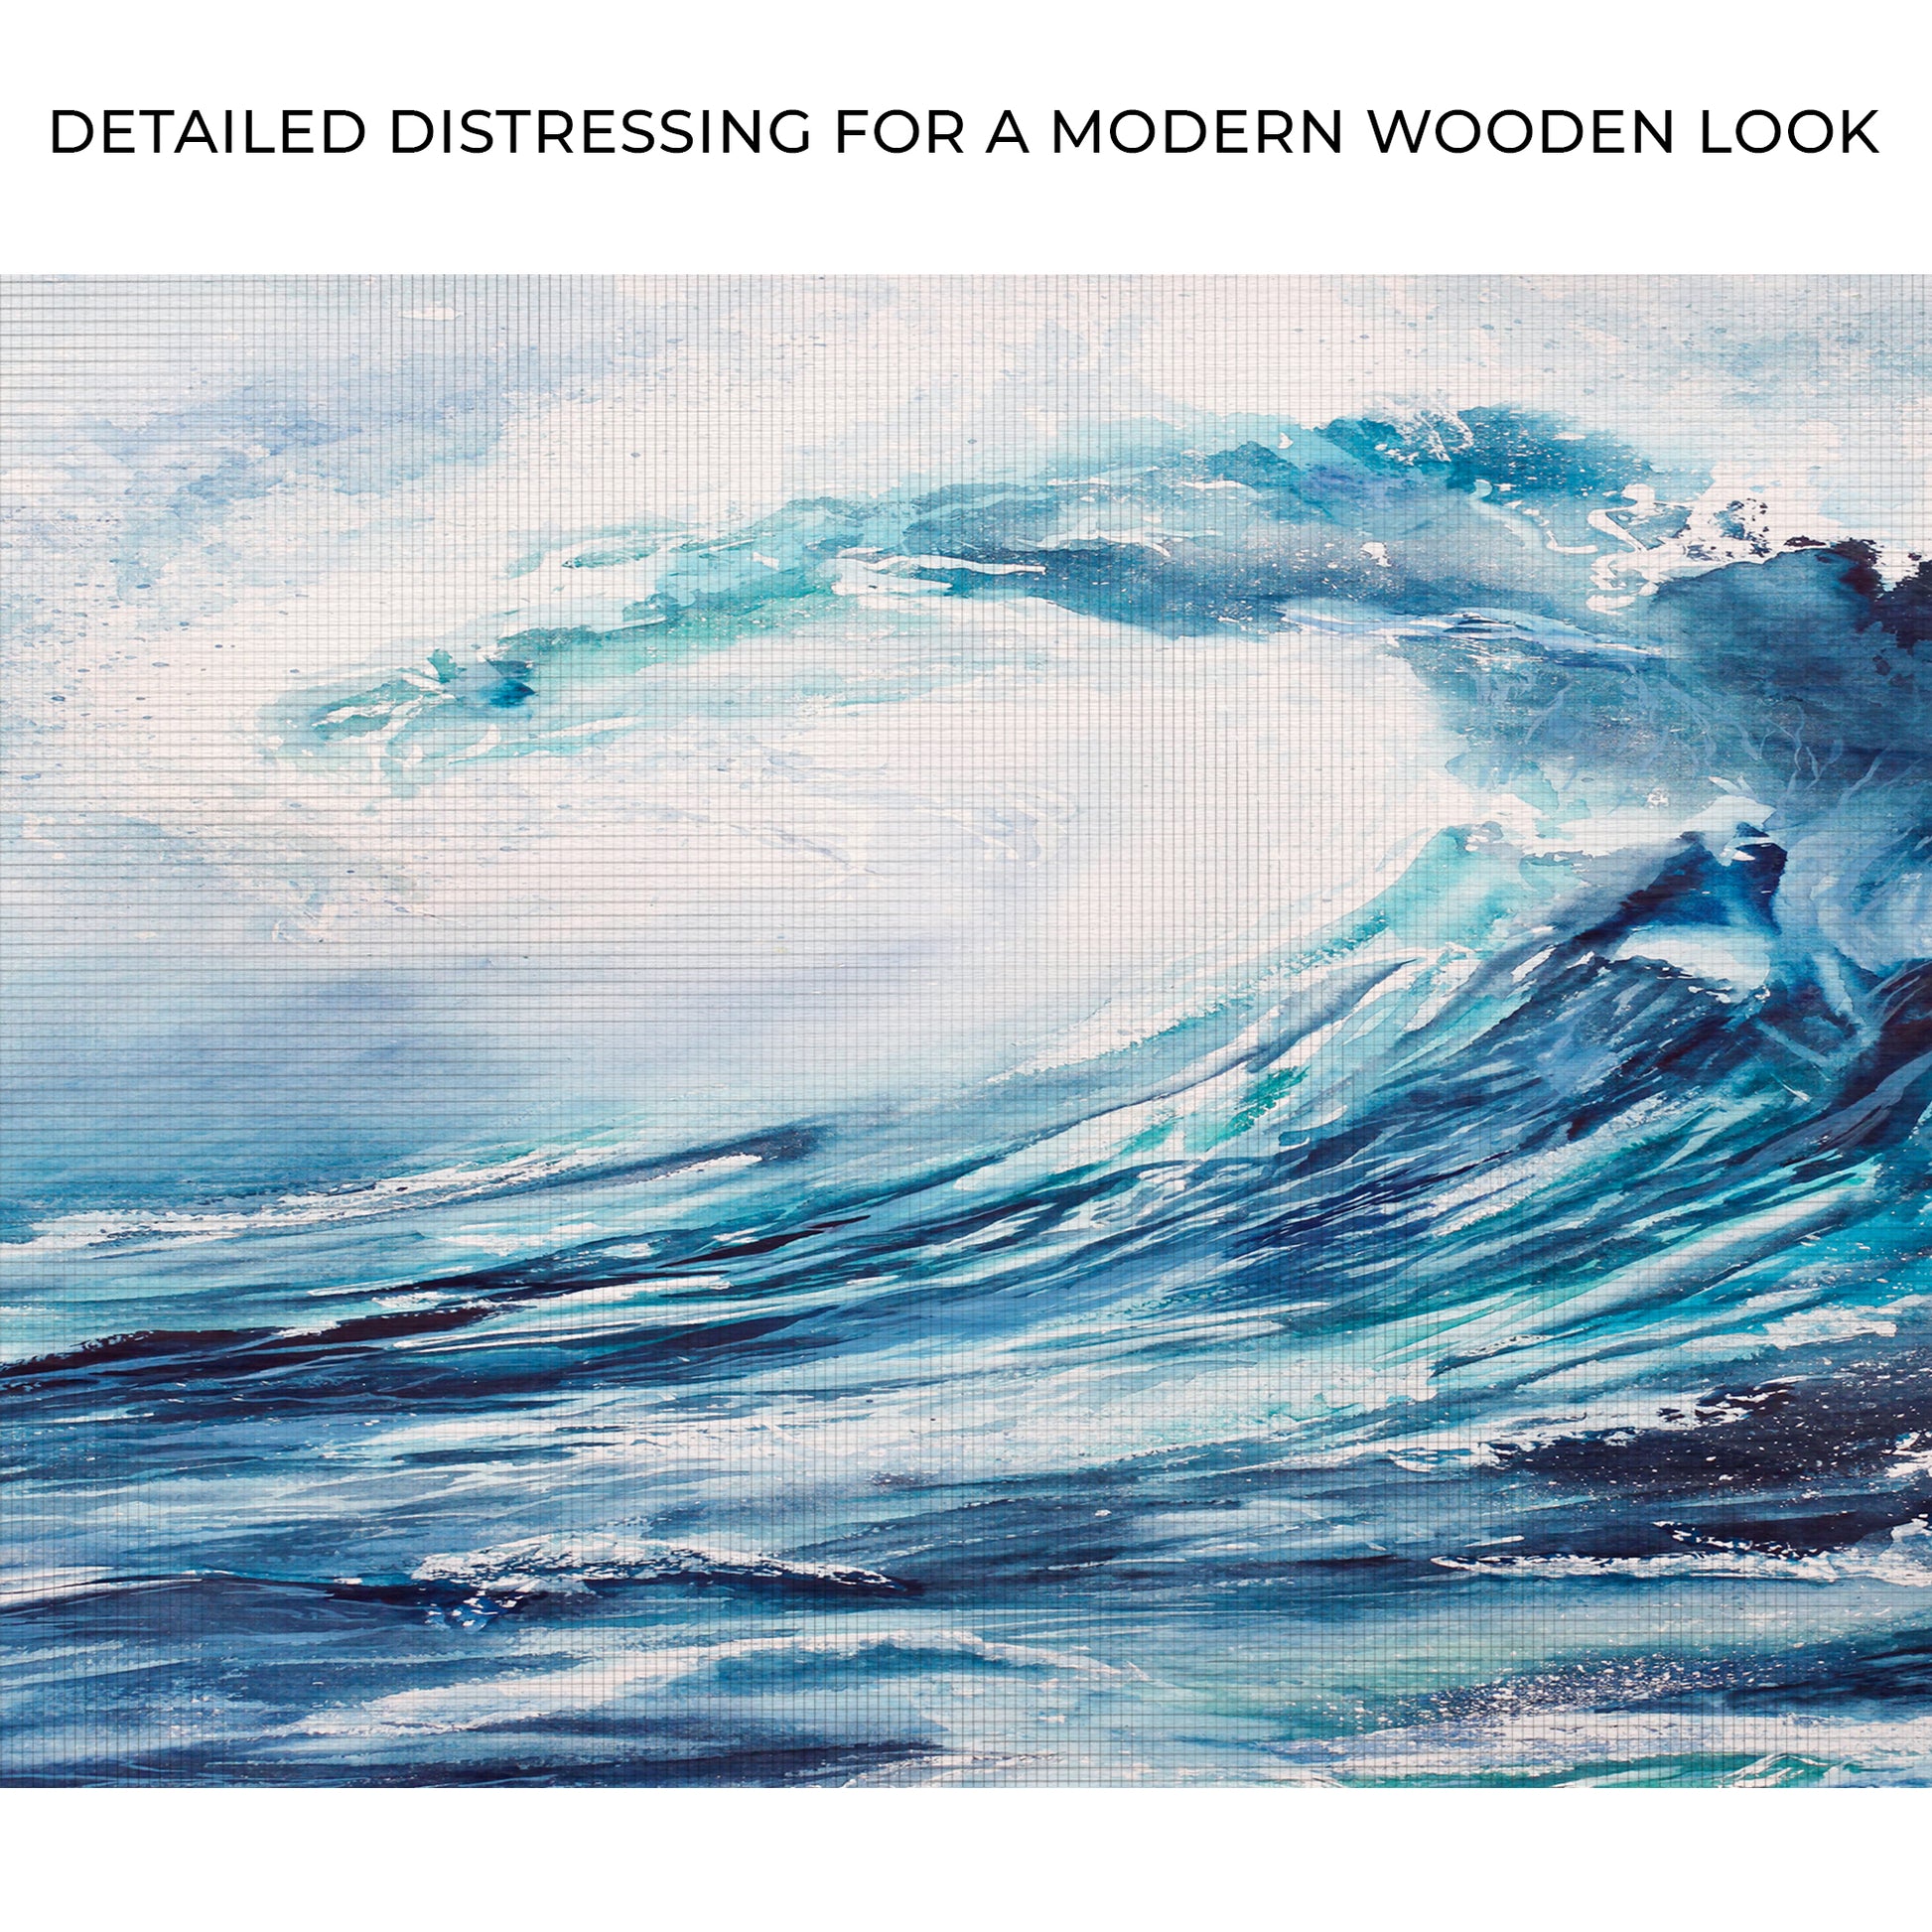 Textured Ocean Wave Painting Canvas Wall Art Zoom - Image by Tailored Canvases